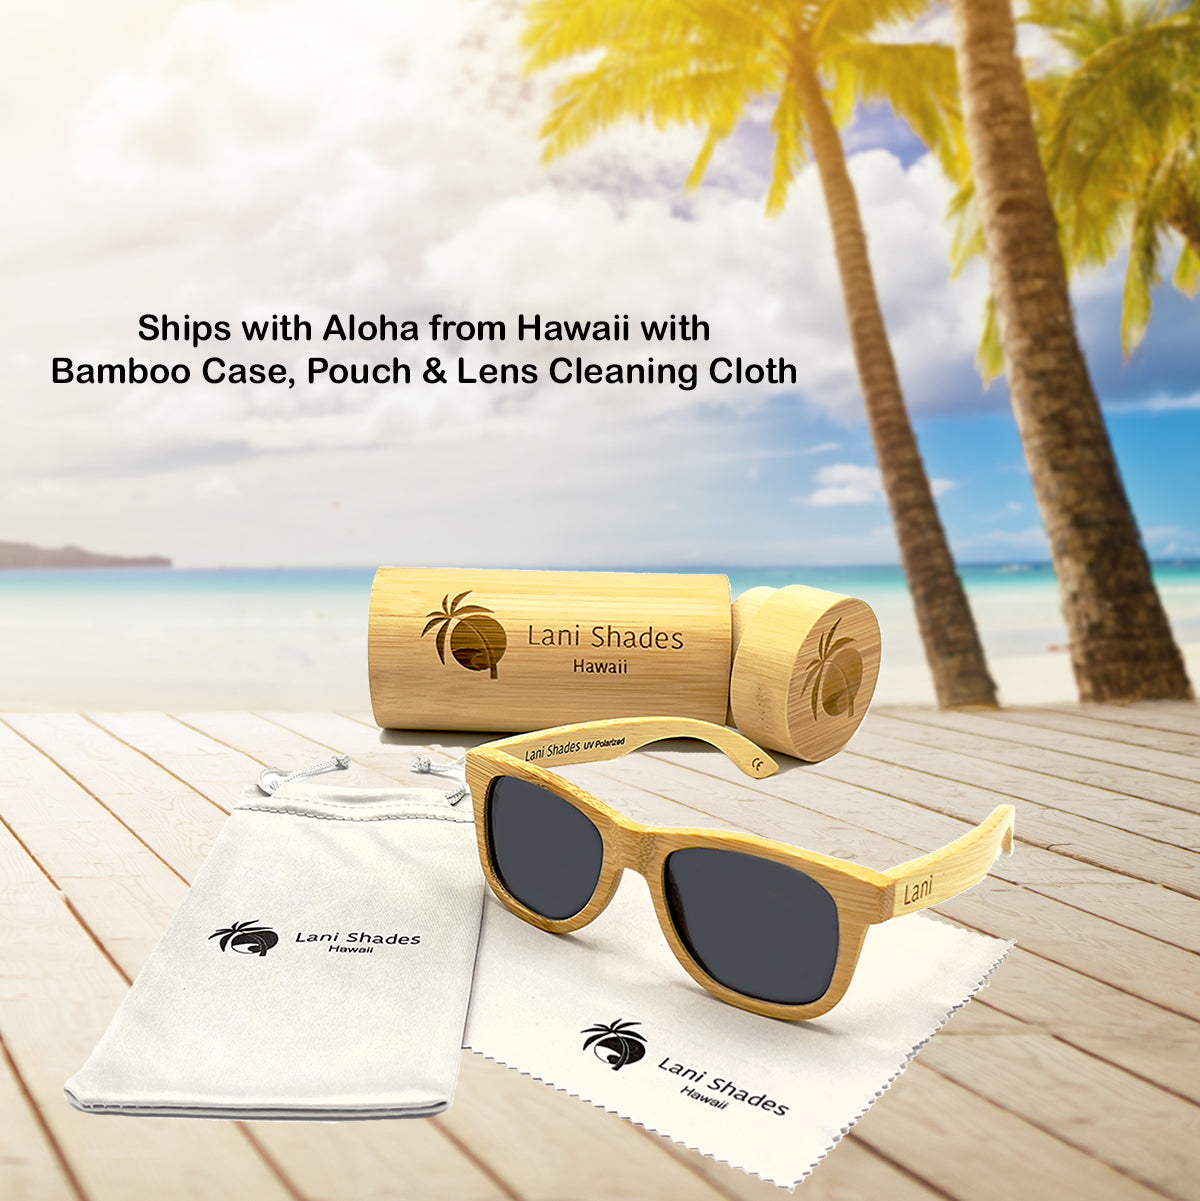 Lani Shades Ohe Classic package contents